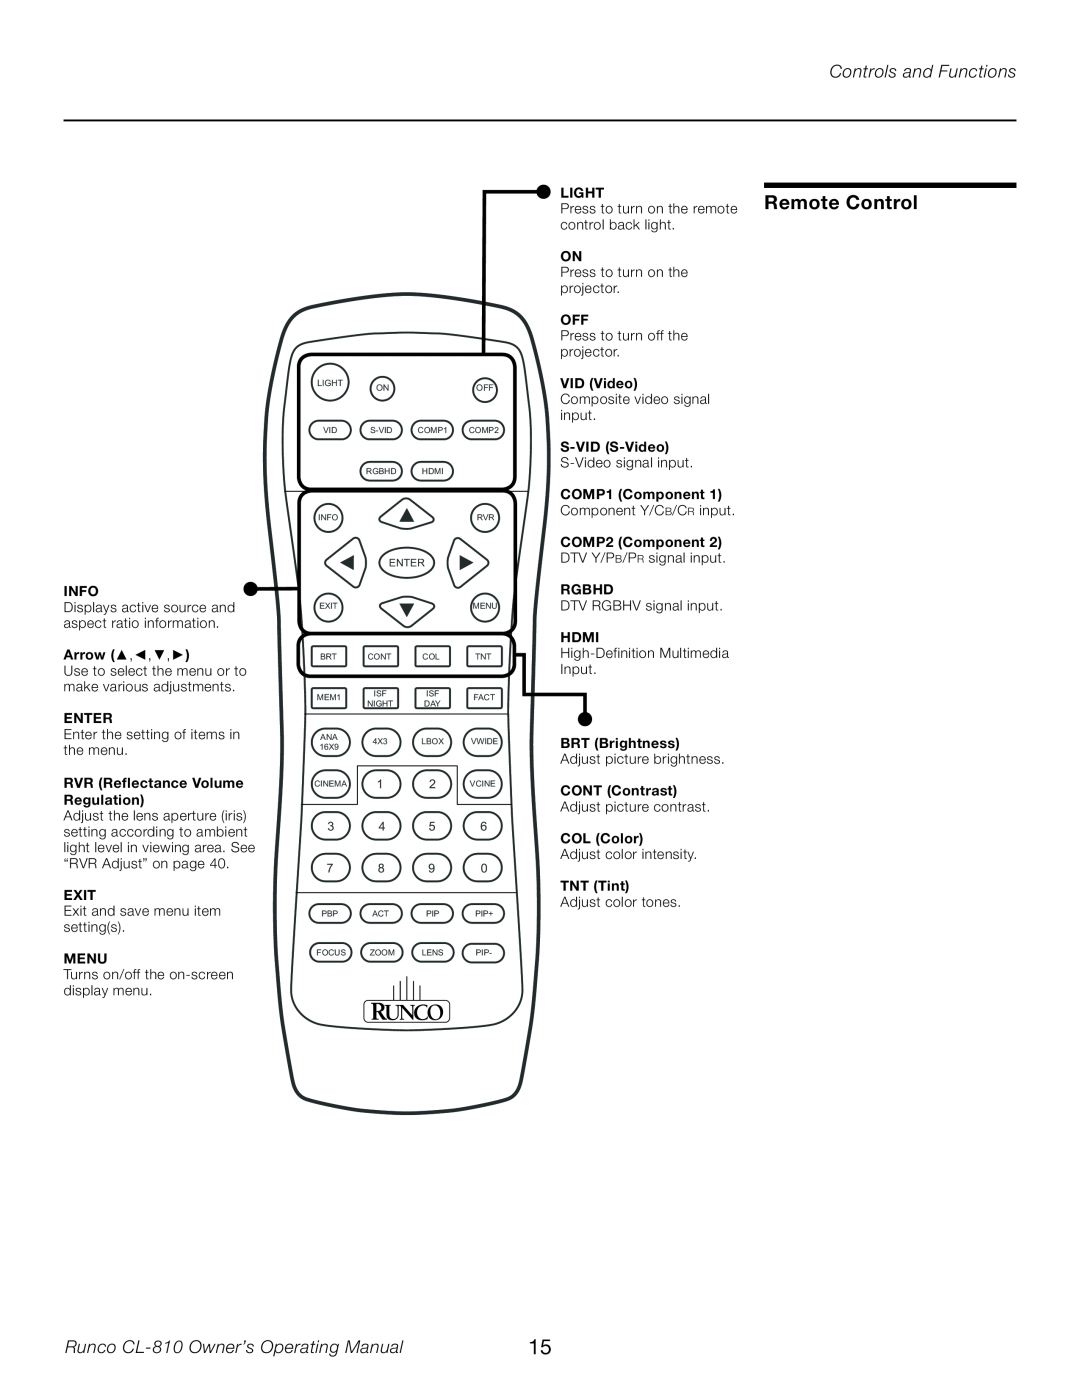 Runco manual Remote Control, Controls and Functions, Runco CL-810 Owner’s Operating Manual 